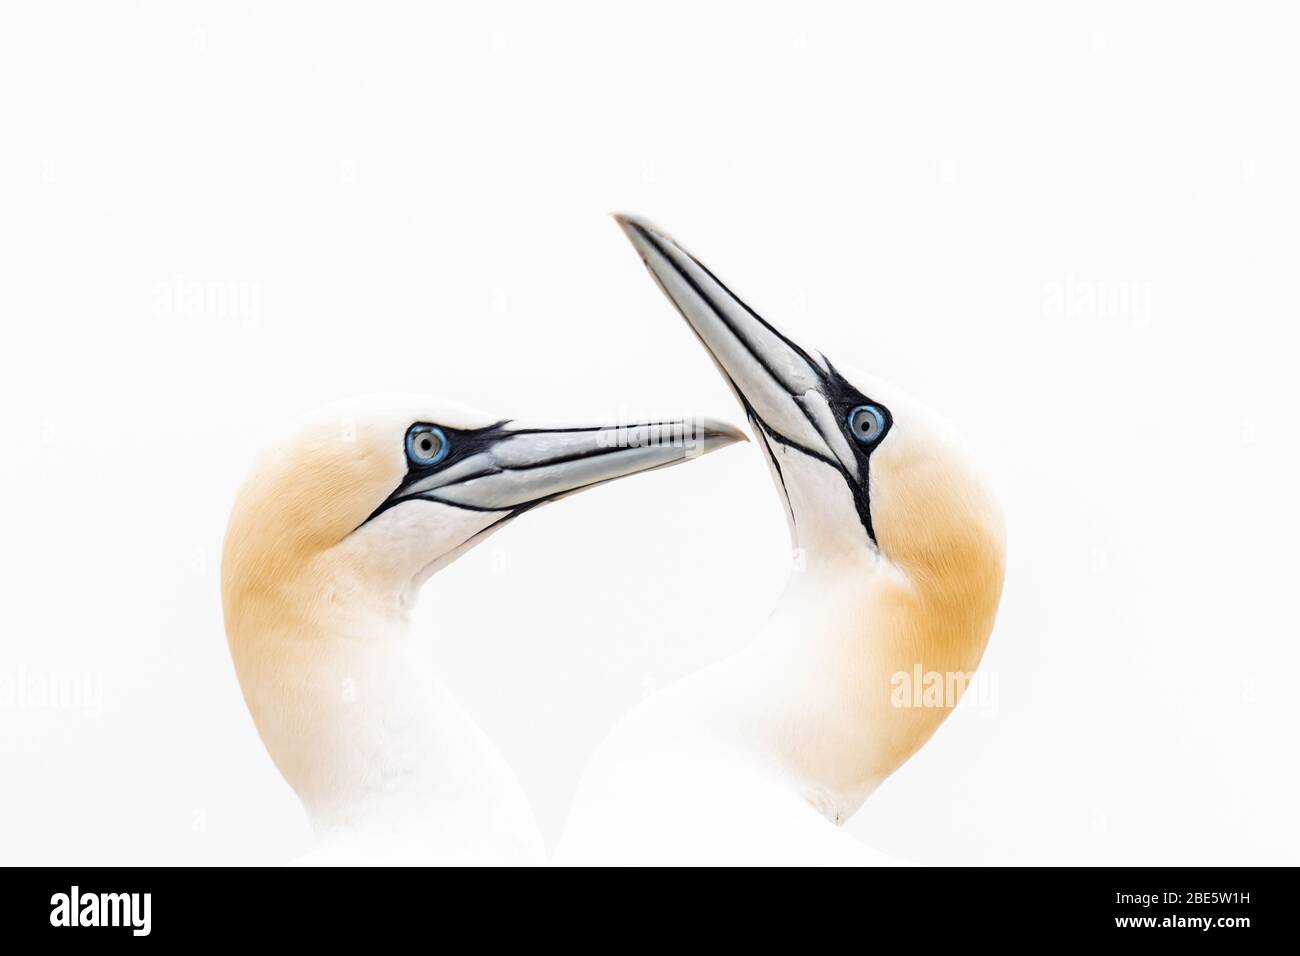 A high key portrait of two gannets Stock Photo